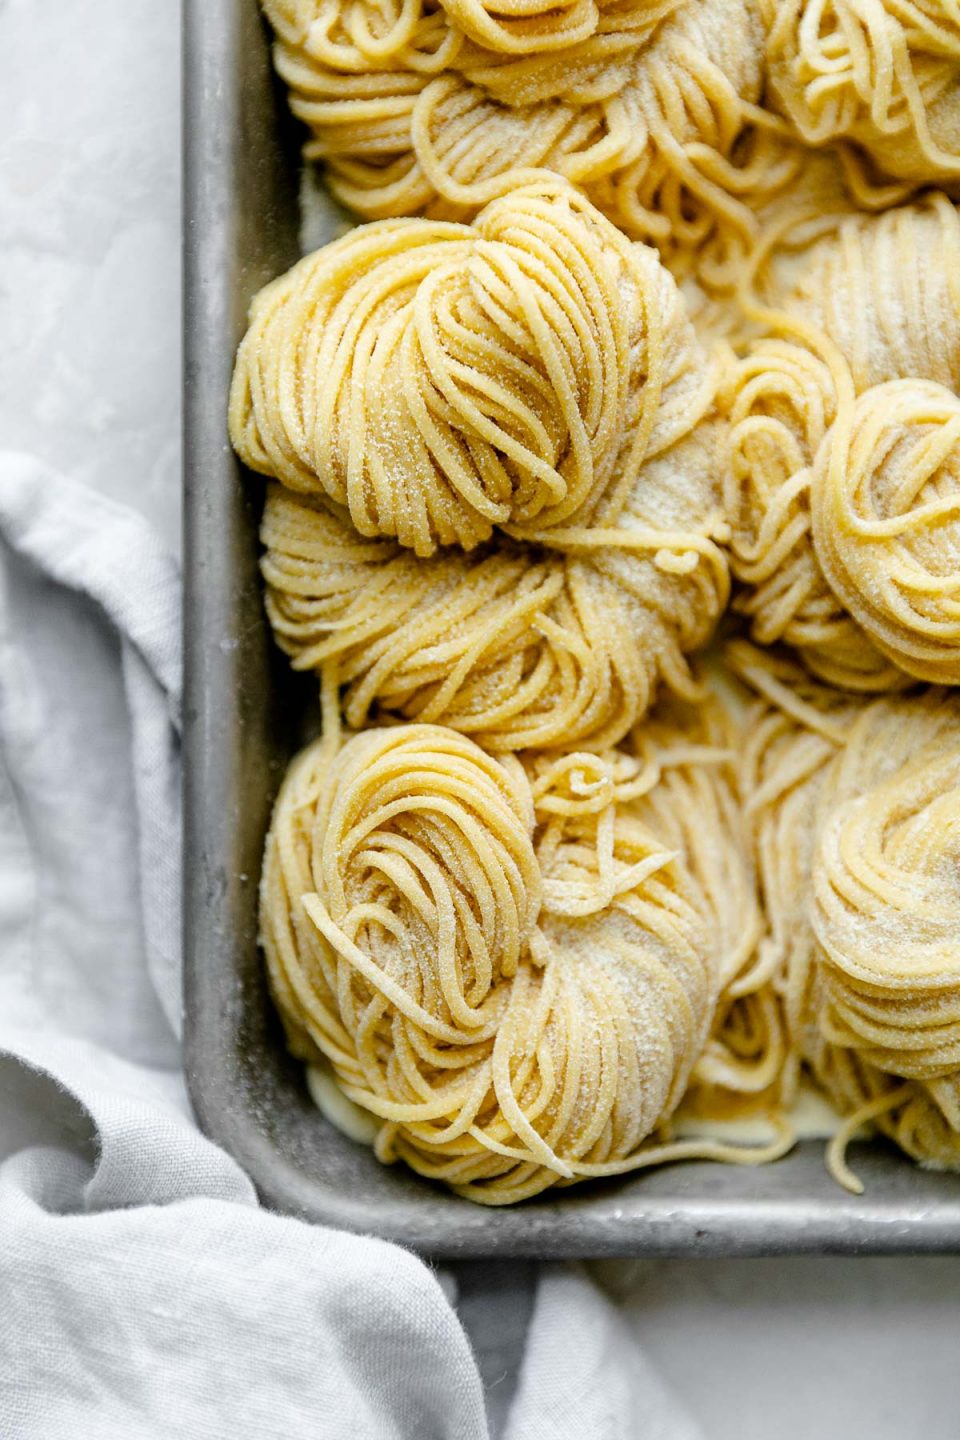 A close up of bundles of fresh pasta cut into spaghetti noodles are arranged on a small aluminum baking sheet and dusted with semolina flour. The baking sheet rests atop a white textured surface and a light blue linen napkin rests alongside the baking sheet.